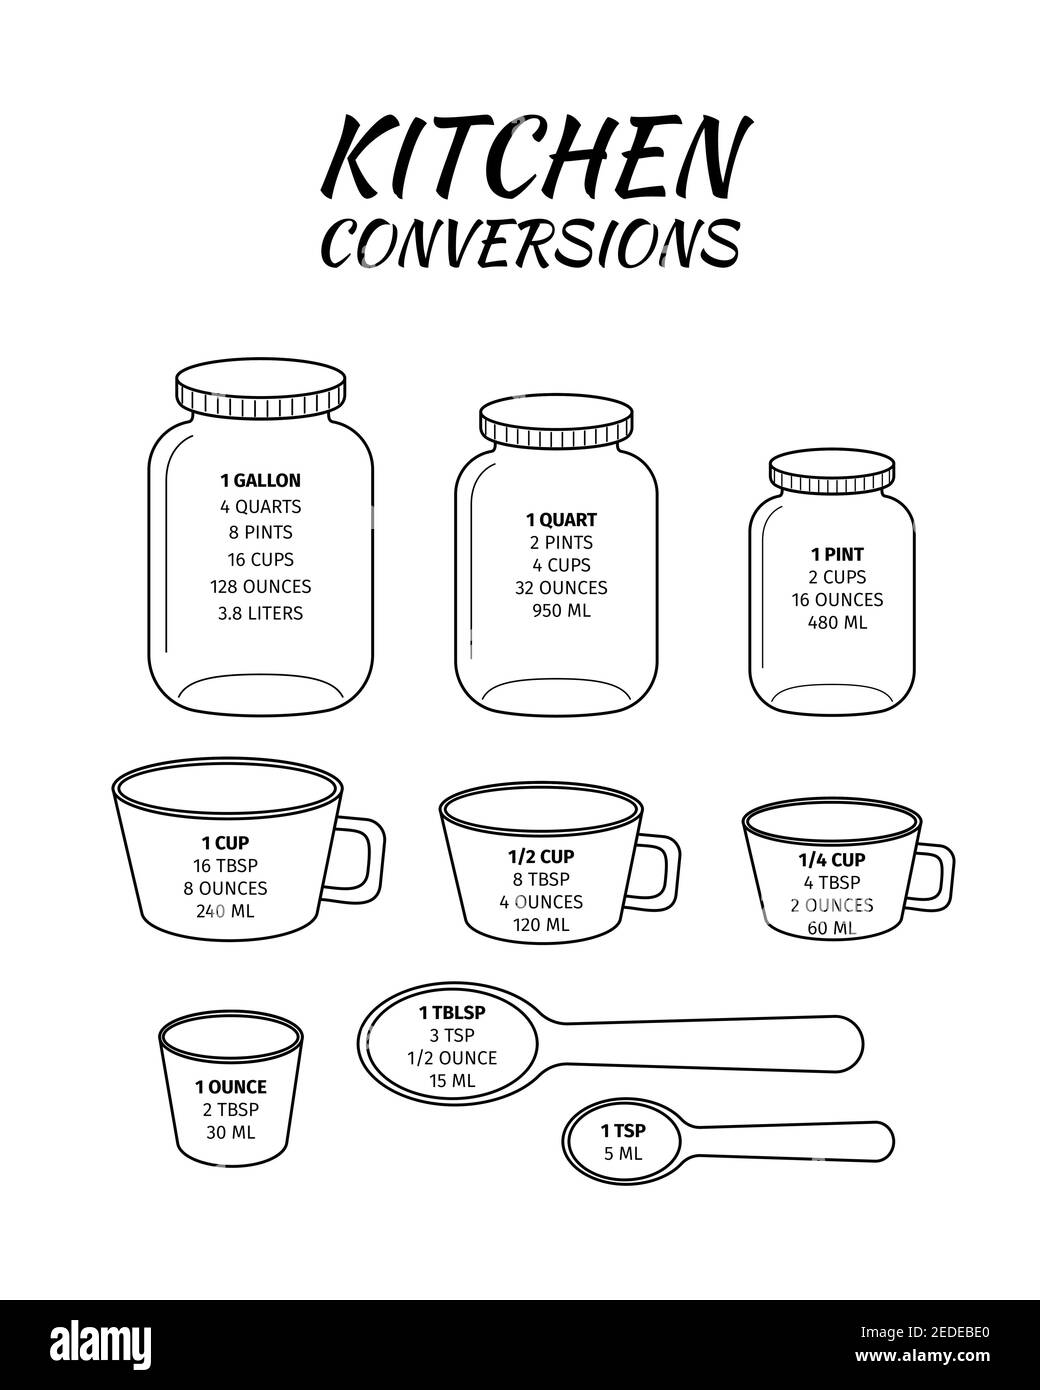 https://c8.alamy.com/comp/2EDEBE0/kitchen-conversions-chart-basic-metric-units-of-cooking-measurements-most-commonly-used-volume-measures-weight-of-liquids-vector-outline-illustration-2EDEBE0.jpg